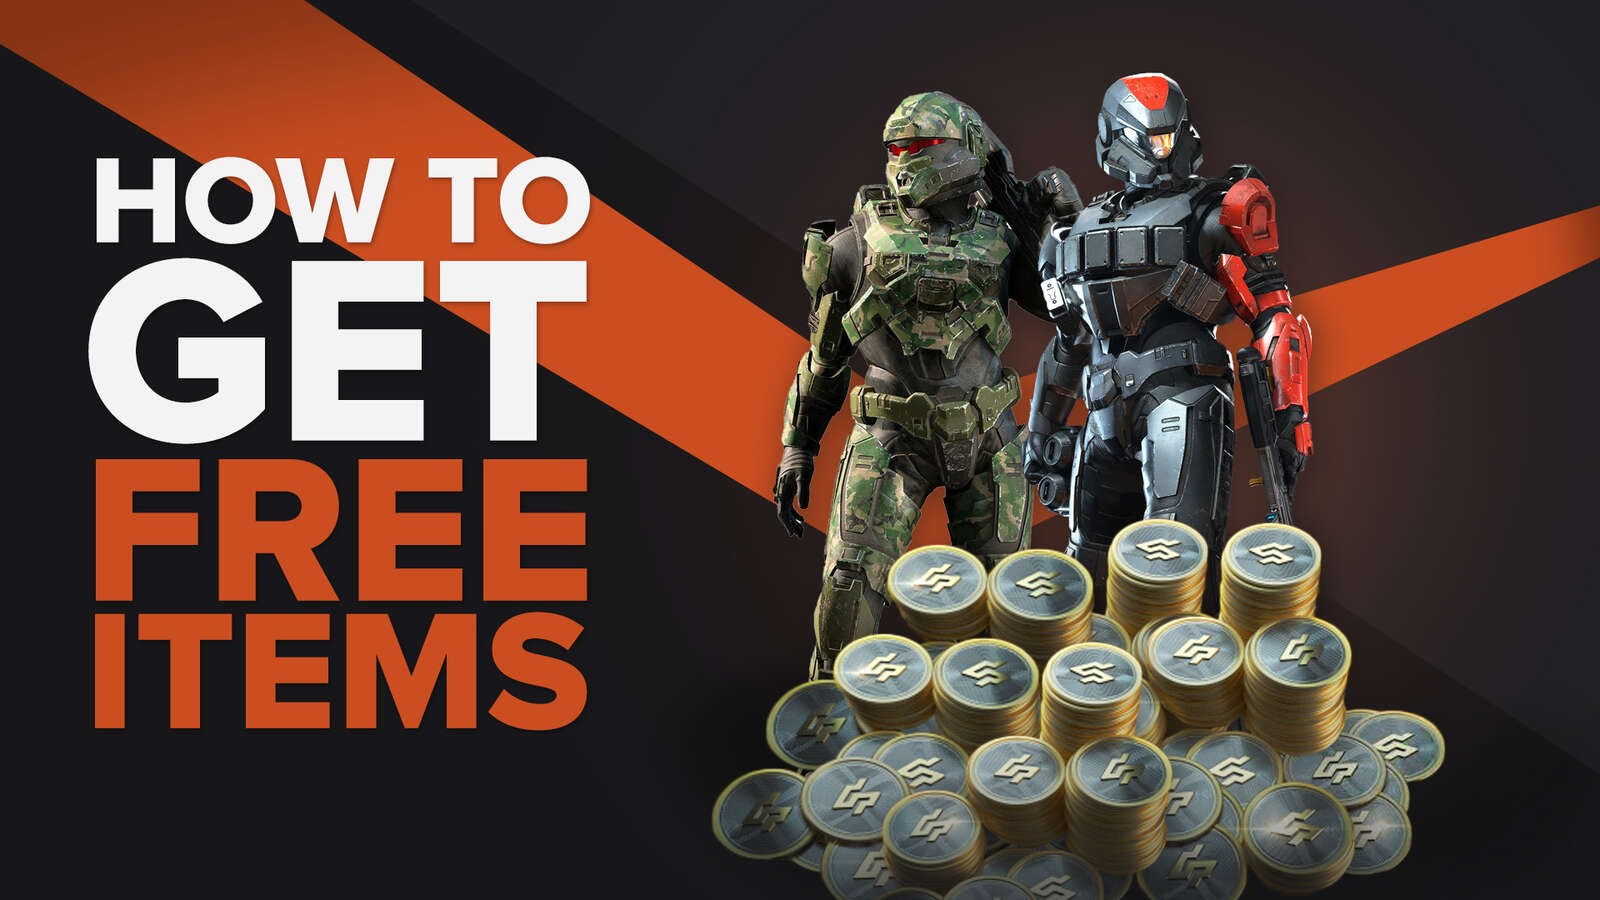 Halo Infinite: How To Get Items For Free (5 Legit Ways)